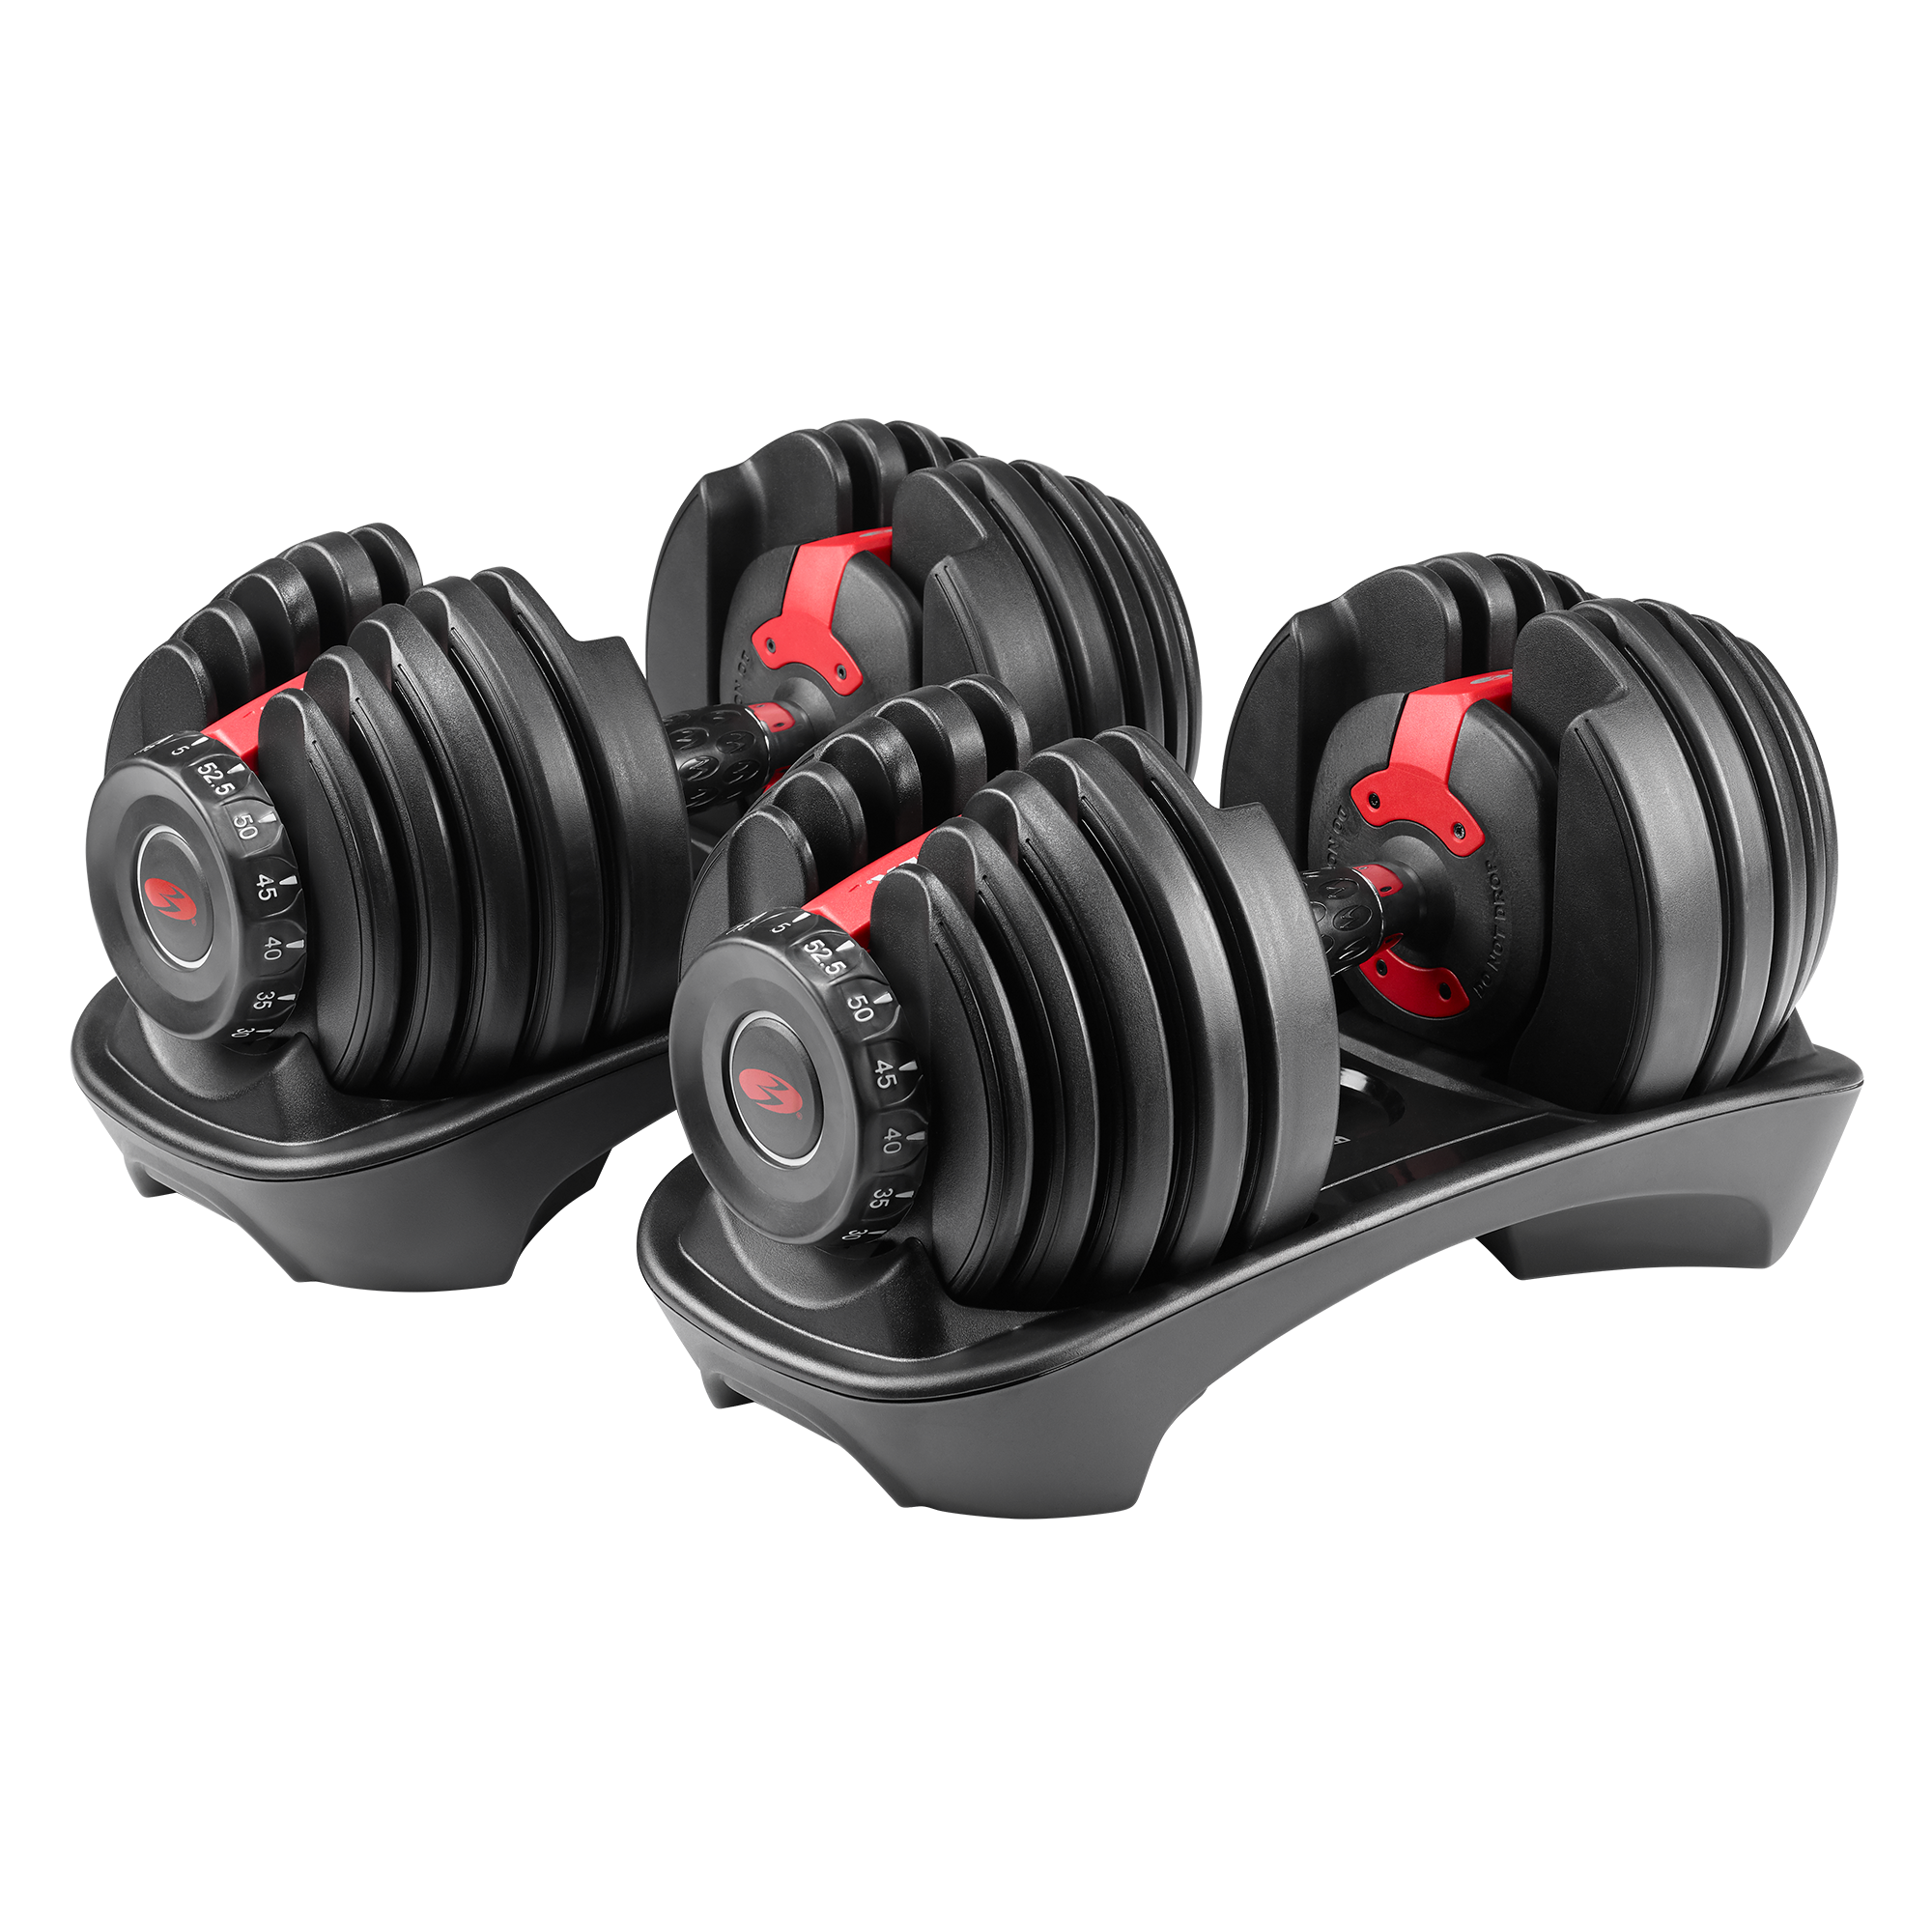 TWO DUMBBELLS NEW Adjustable Dumbbell Dumbbells Weights 552 Set Pair 52.5lbs